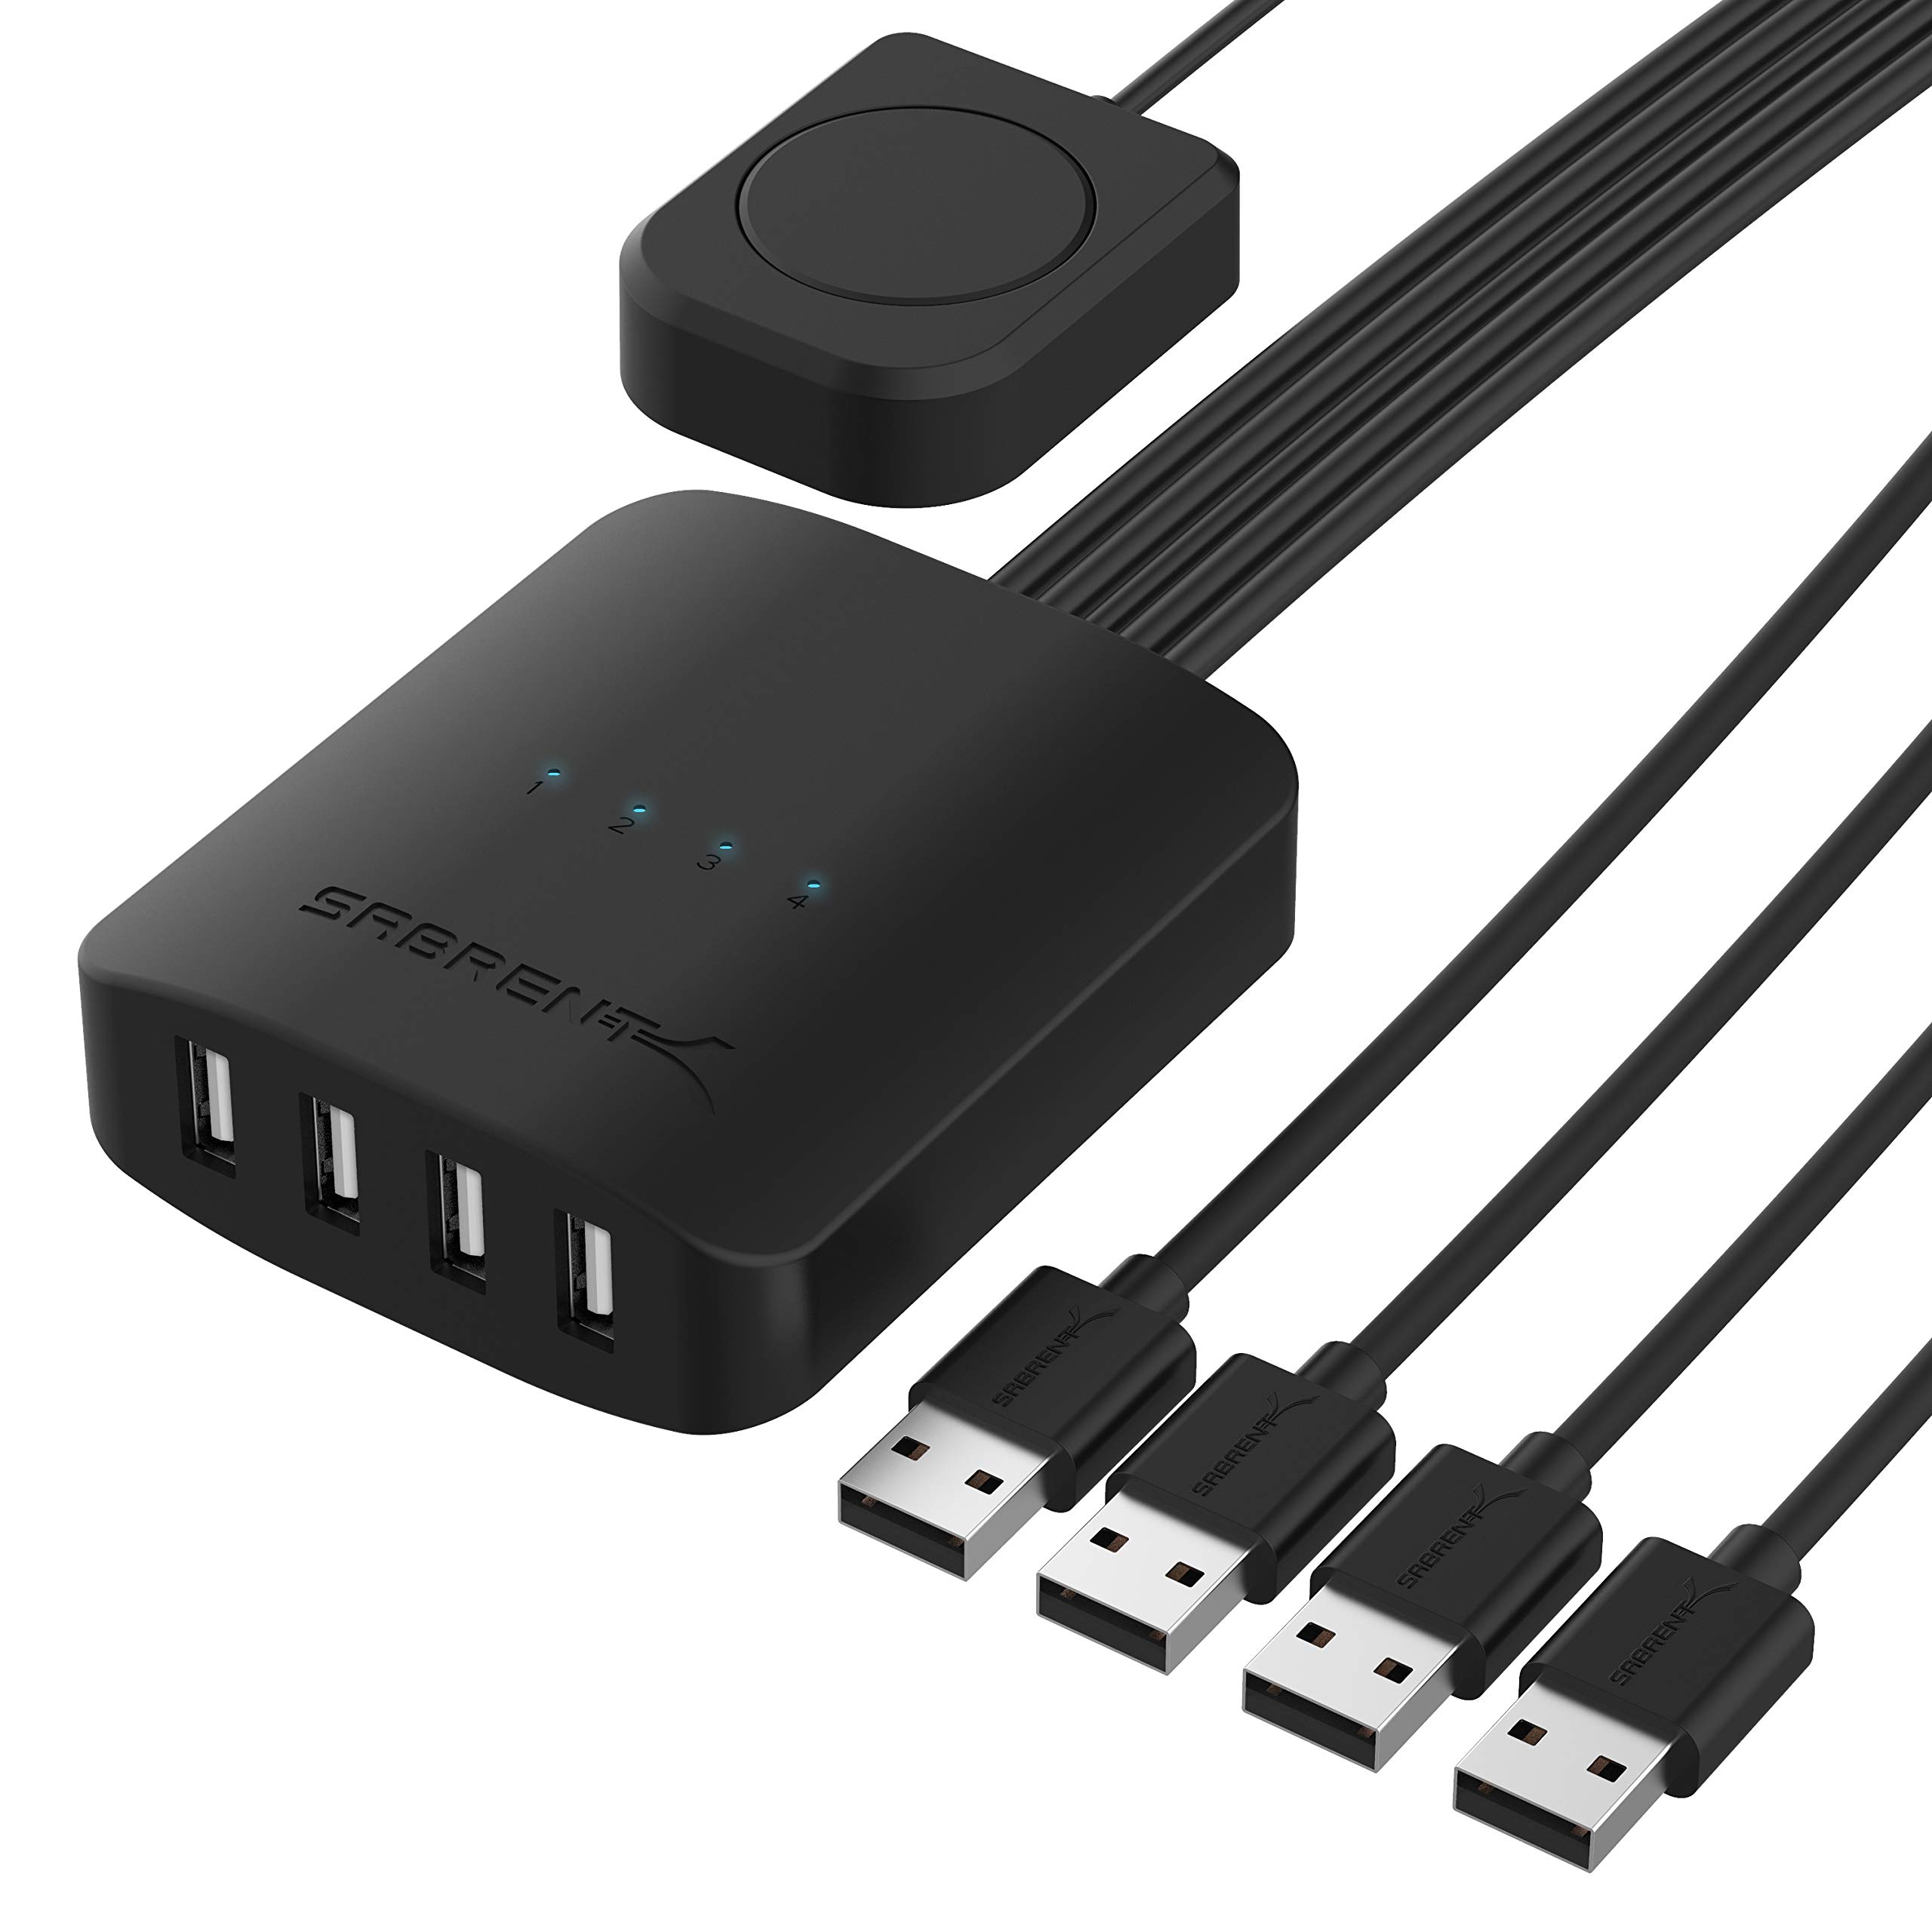 Sabrent USB 2.0 Sharing Switch up to 4 Computers and Peripherals LED Device Indicators (USB-USS4) - $21.99